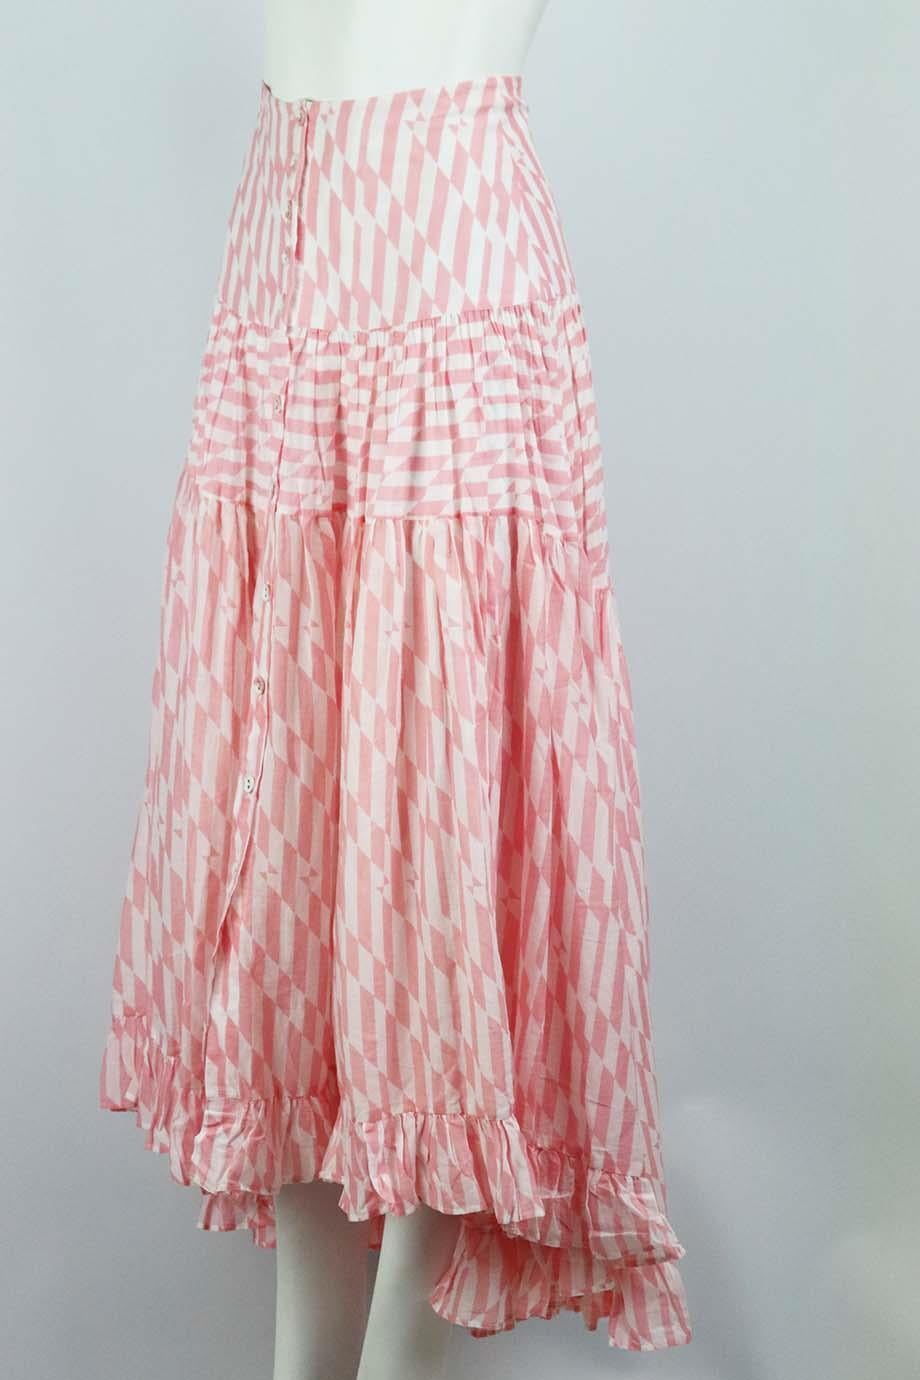 This ‘Penelope’ maxi skirt by Alexandra Miro is made from crisp cotton in a pink geometric print with a wide high waistband, full tiered skirt finished with a ruffle hem. Pink and white cotton. Button fastening at front. 100% Cotton. Size: Medium